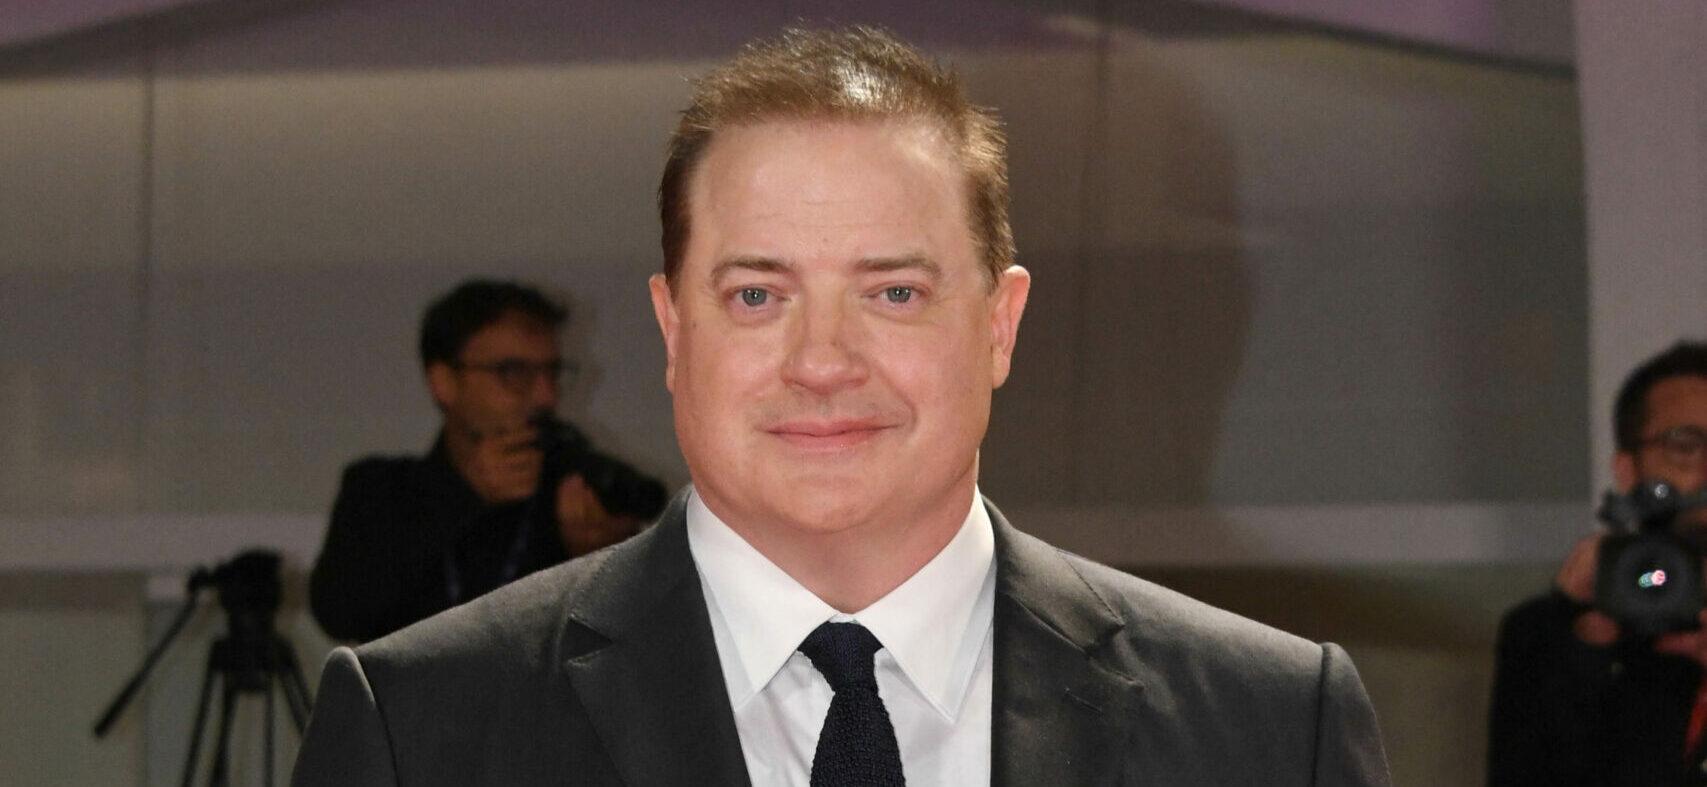 Brendan Fraser Unsure Of His Next Role As He’s ‘Really Being Picky’ After Oscar Win